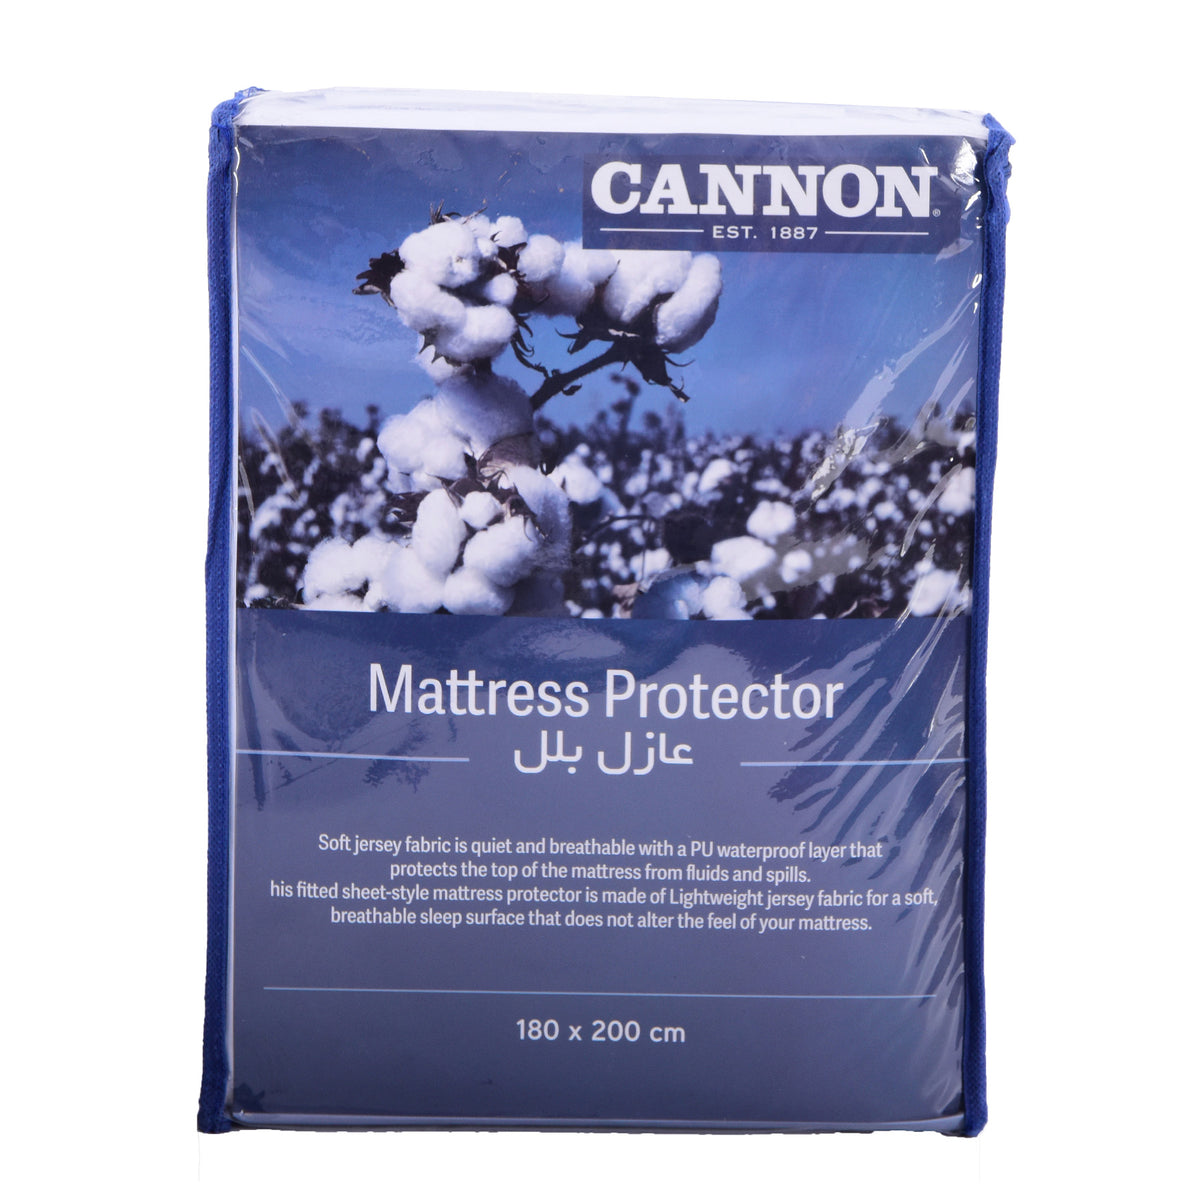 Queen Mattress Protector , White Color size: 180x200cm.